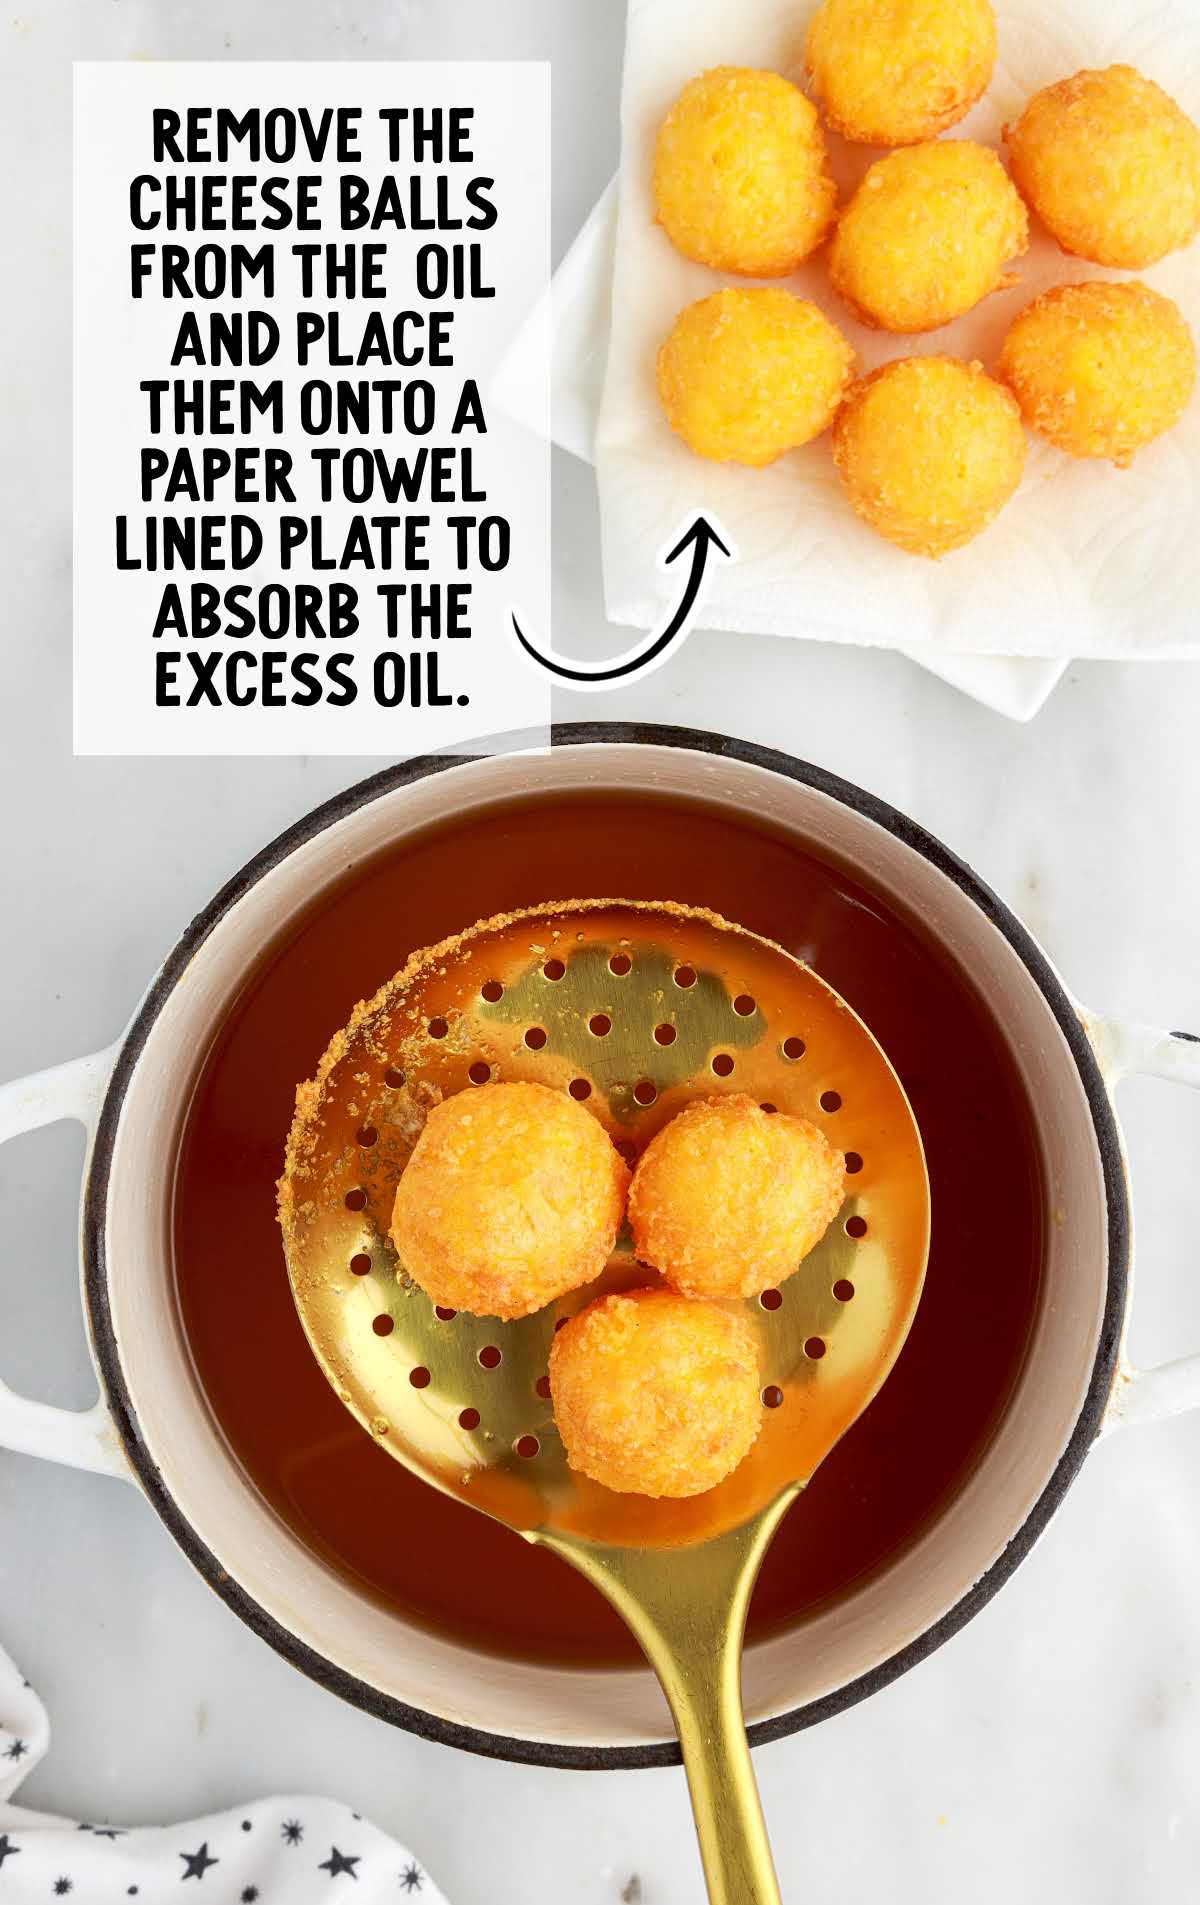 cheese balls removed from oil and placed in a paper towel